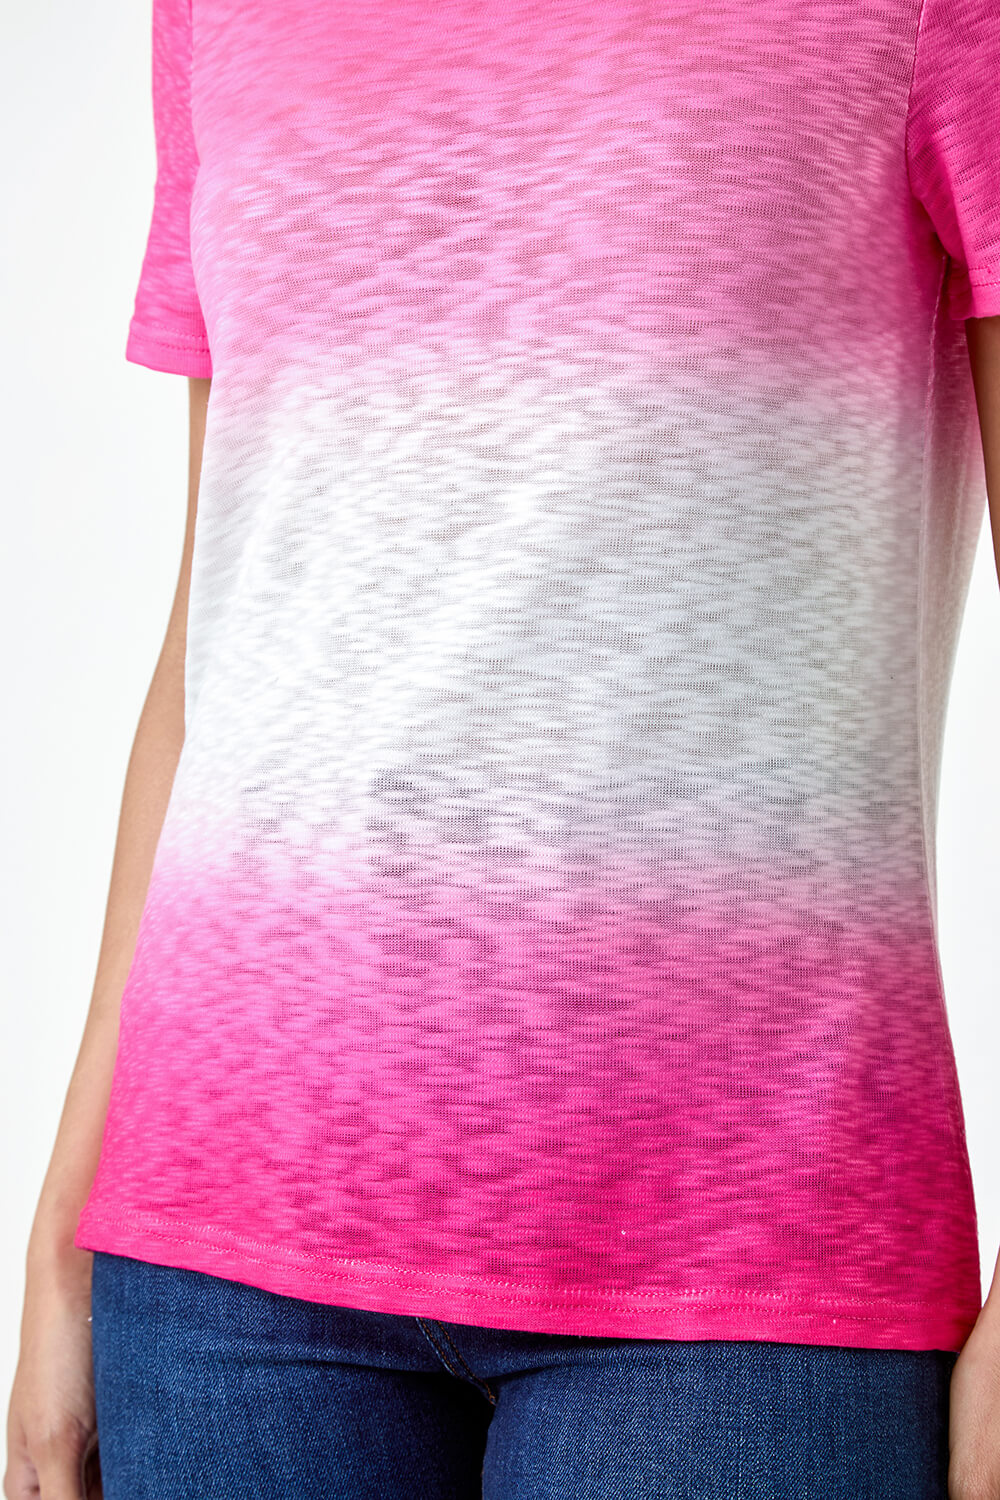 PINK Ombre Burnout Print Stretch Jersey T-Shirt, Image 5 of 5